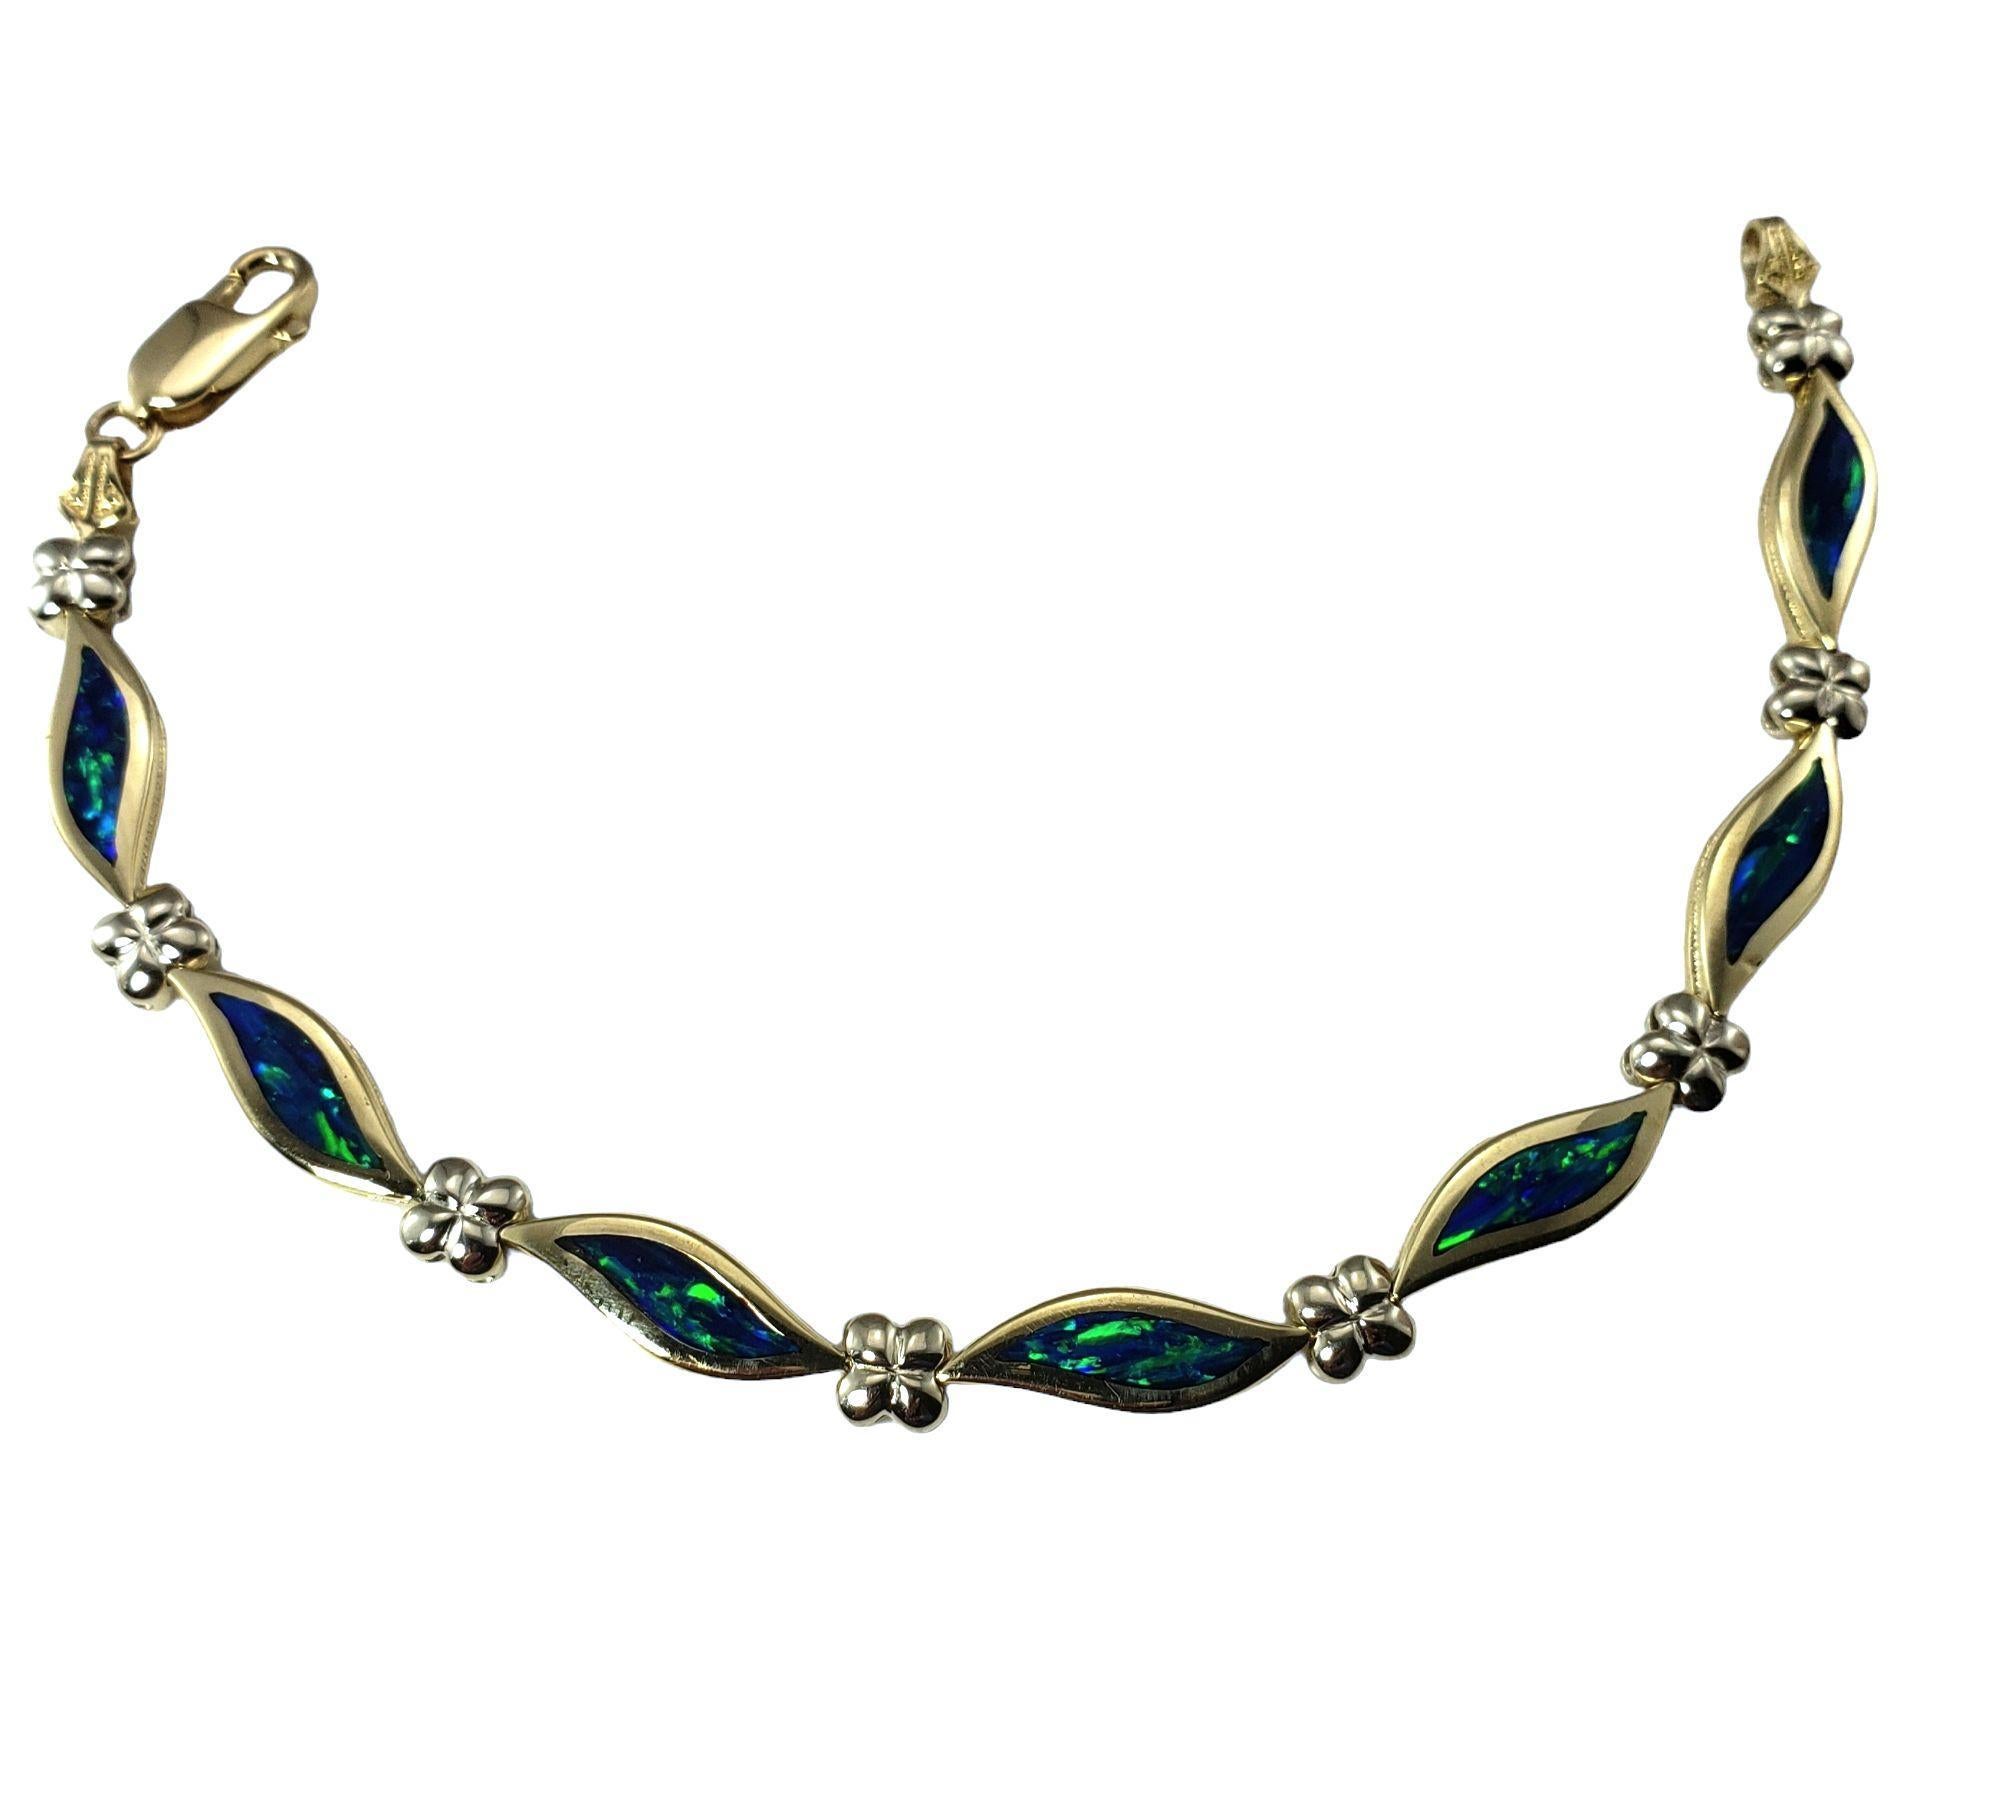  14 Karat Yellow Gold Inlaid Opal Bracelet-

This stunning bracelet features lovely inlaid opal set in beautifully detailed 14K yellow gold. Width: 6 mm.

Size: 6.75 inches 

Weight: 9.0 dwt. / 14 gr.

Stamped: 14K

Very good condition,